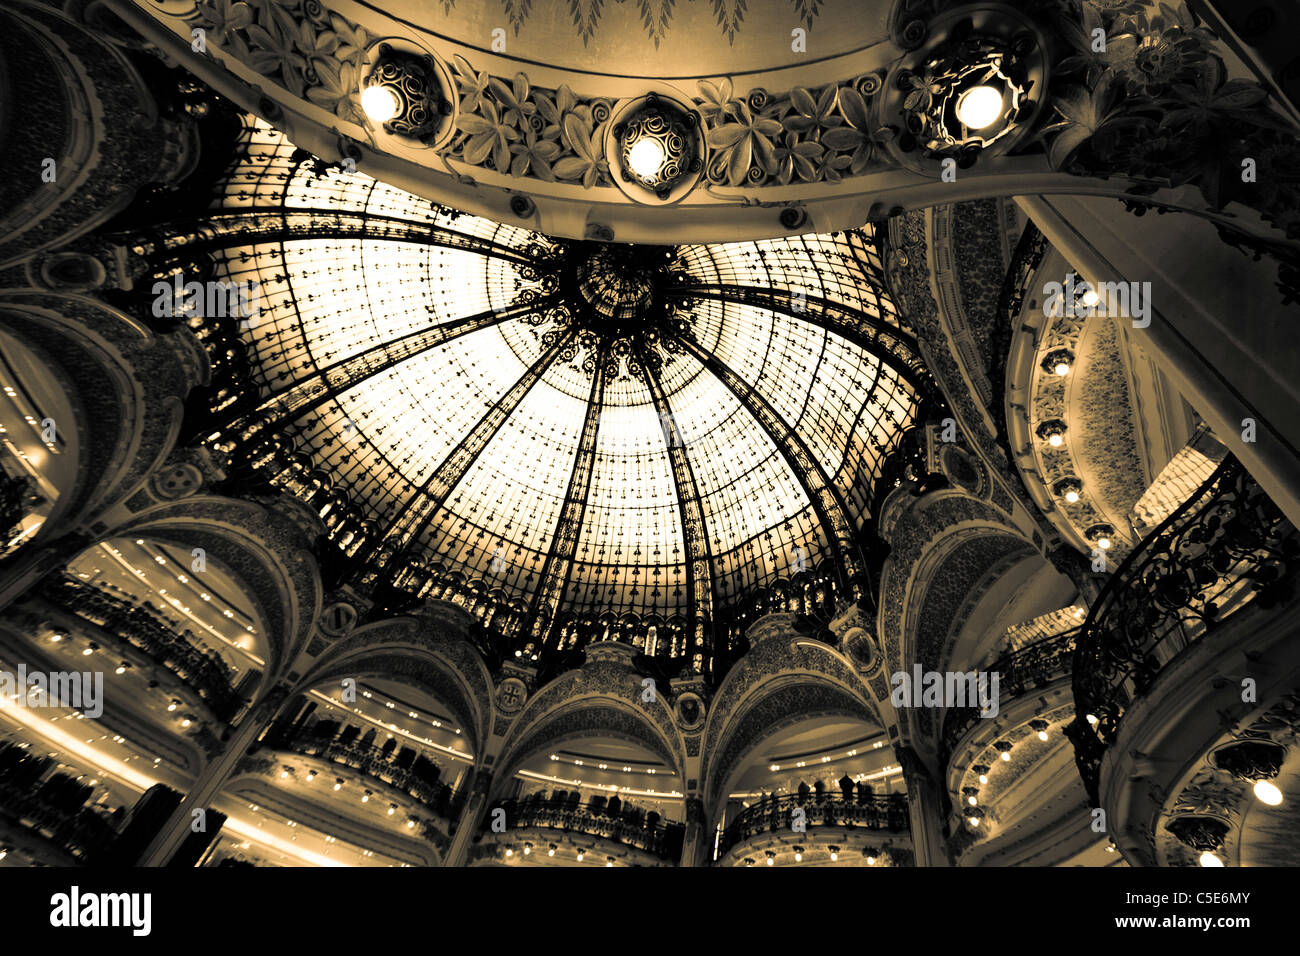 The ornate roof at the Galerie Lafayette, Paris, France. Stock Photo